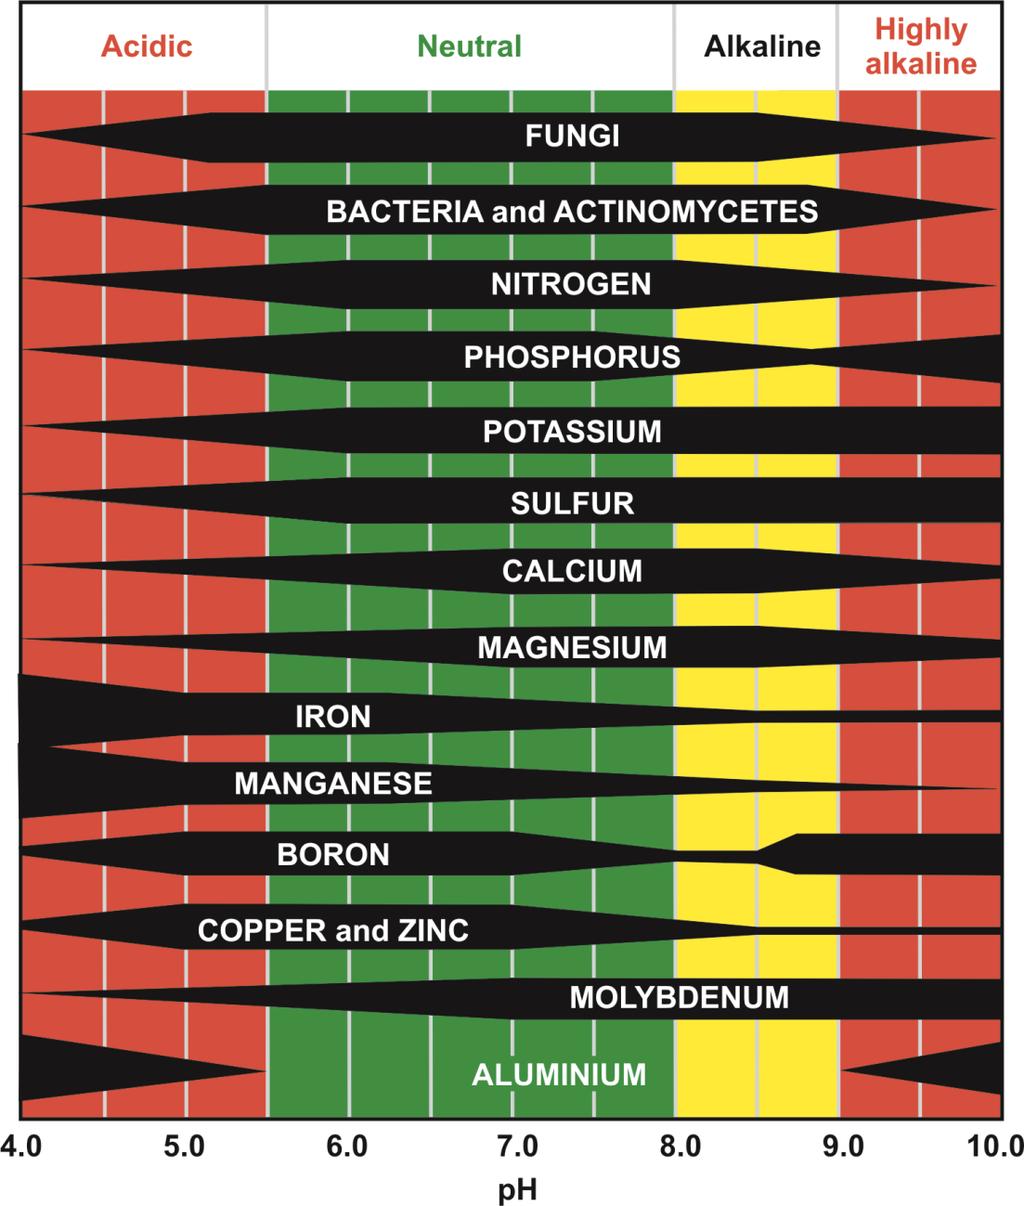 Generally, high (alkaline) or low (acidic) soil ph conditions reduce the availability of macro and trace elements.